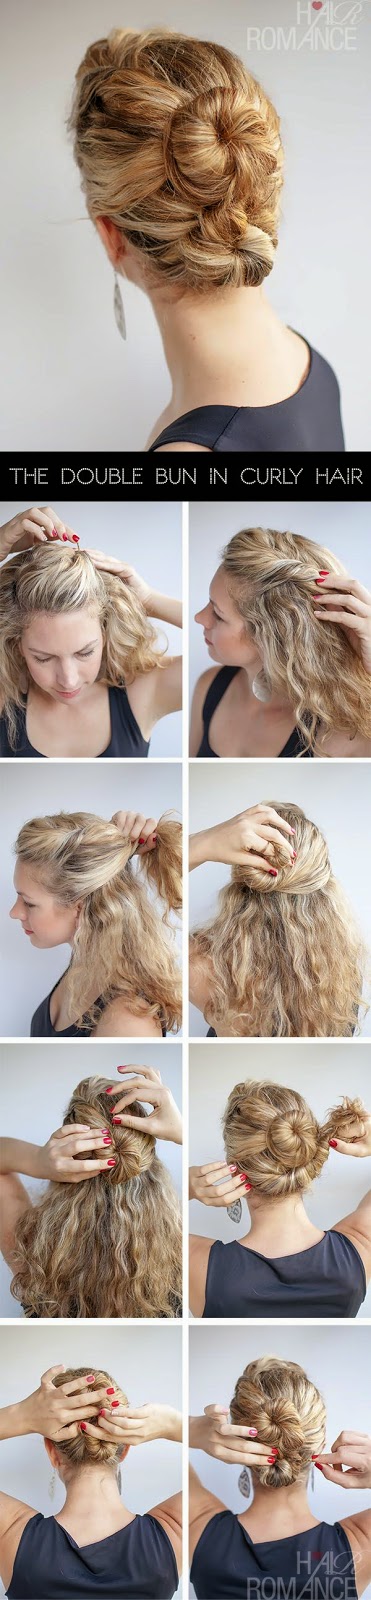 15 Hairstyles for Curly Hair